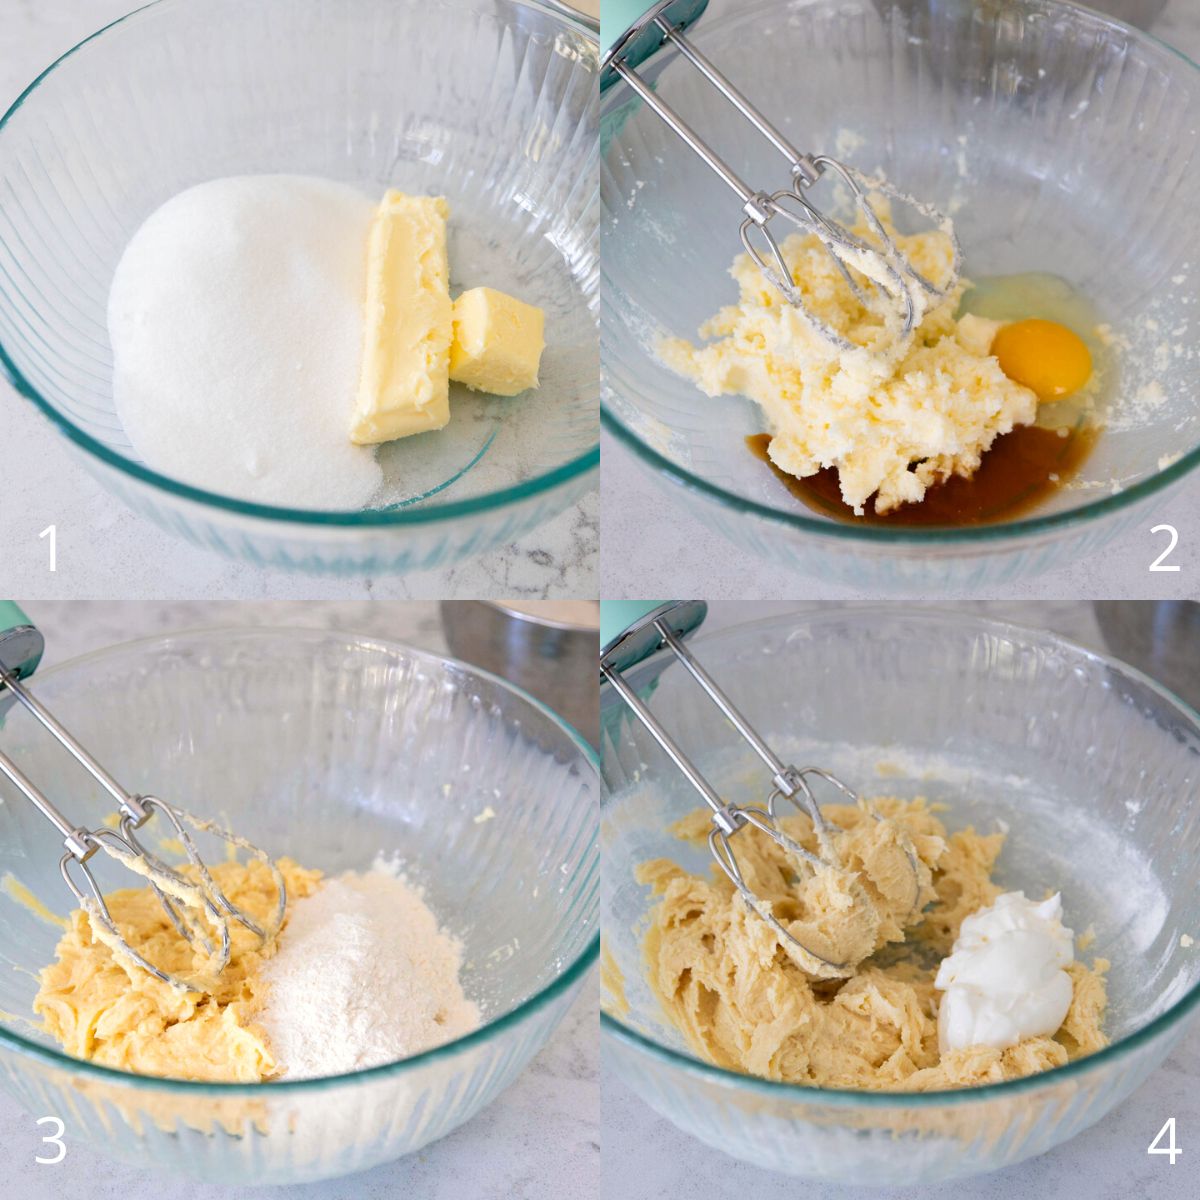 The step by step photos show how to make the cookie dough for the black and white cookies.